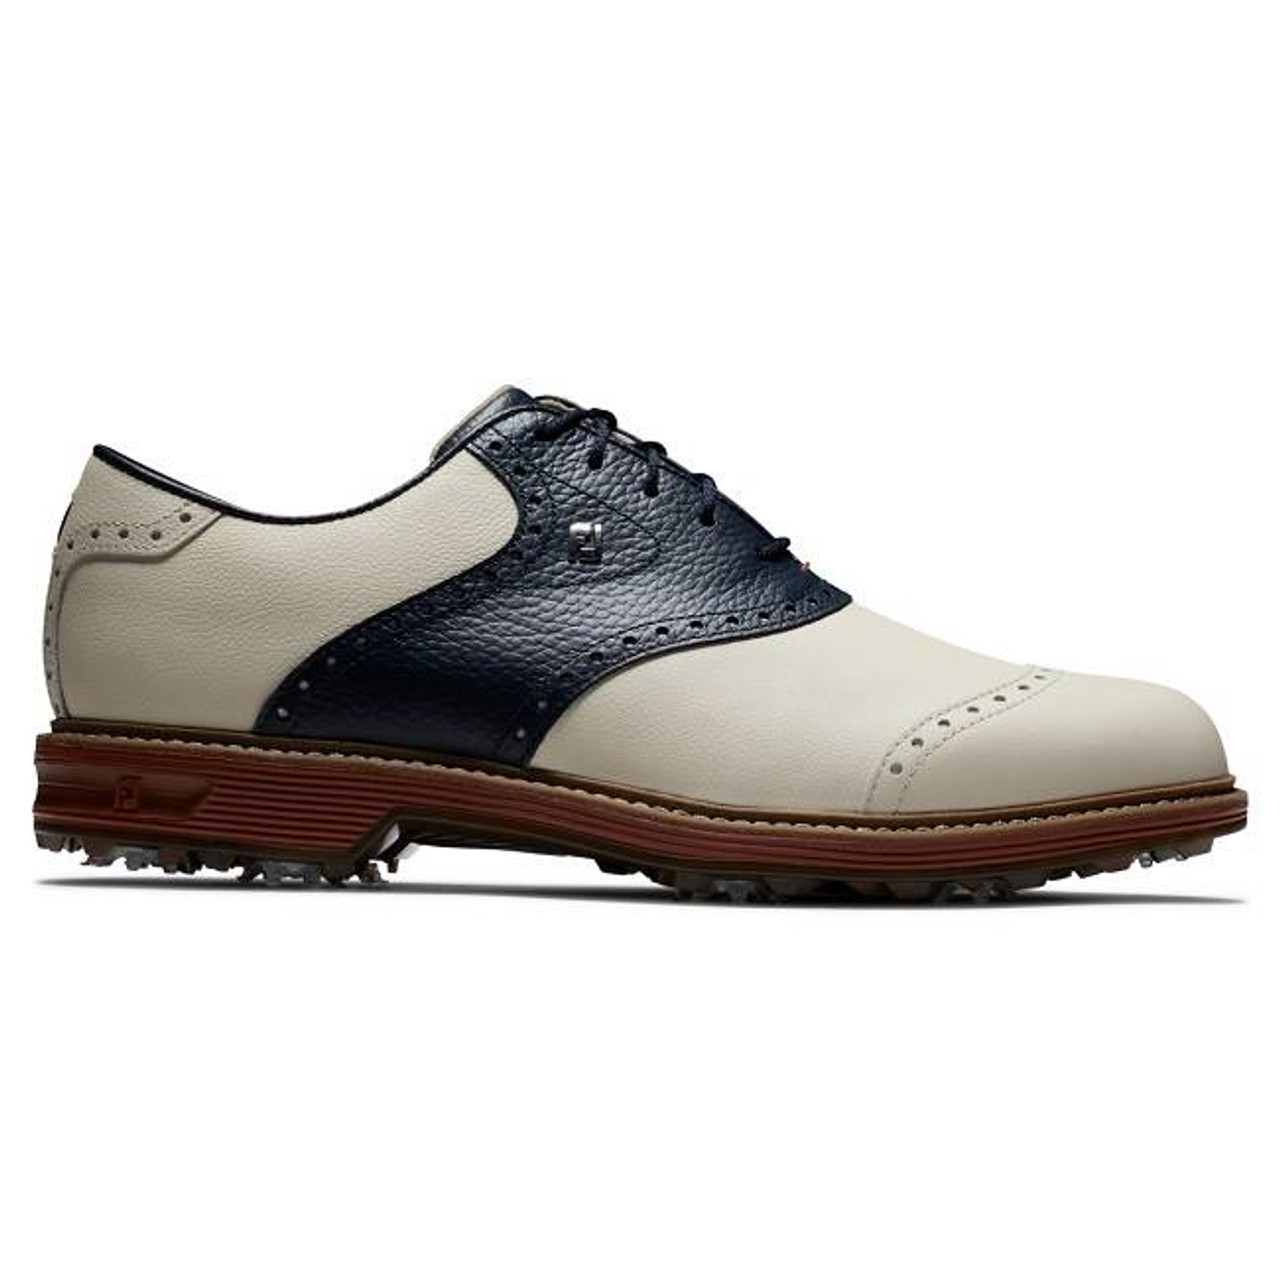 FootJoy Golf DryJoy Wilcox Premiere Series Spiked Shoes ...